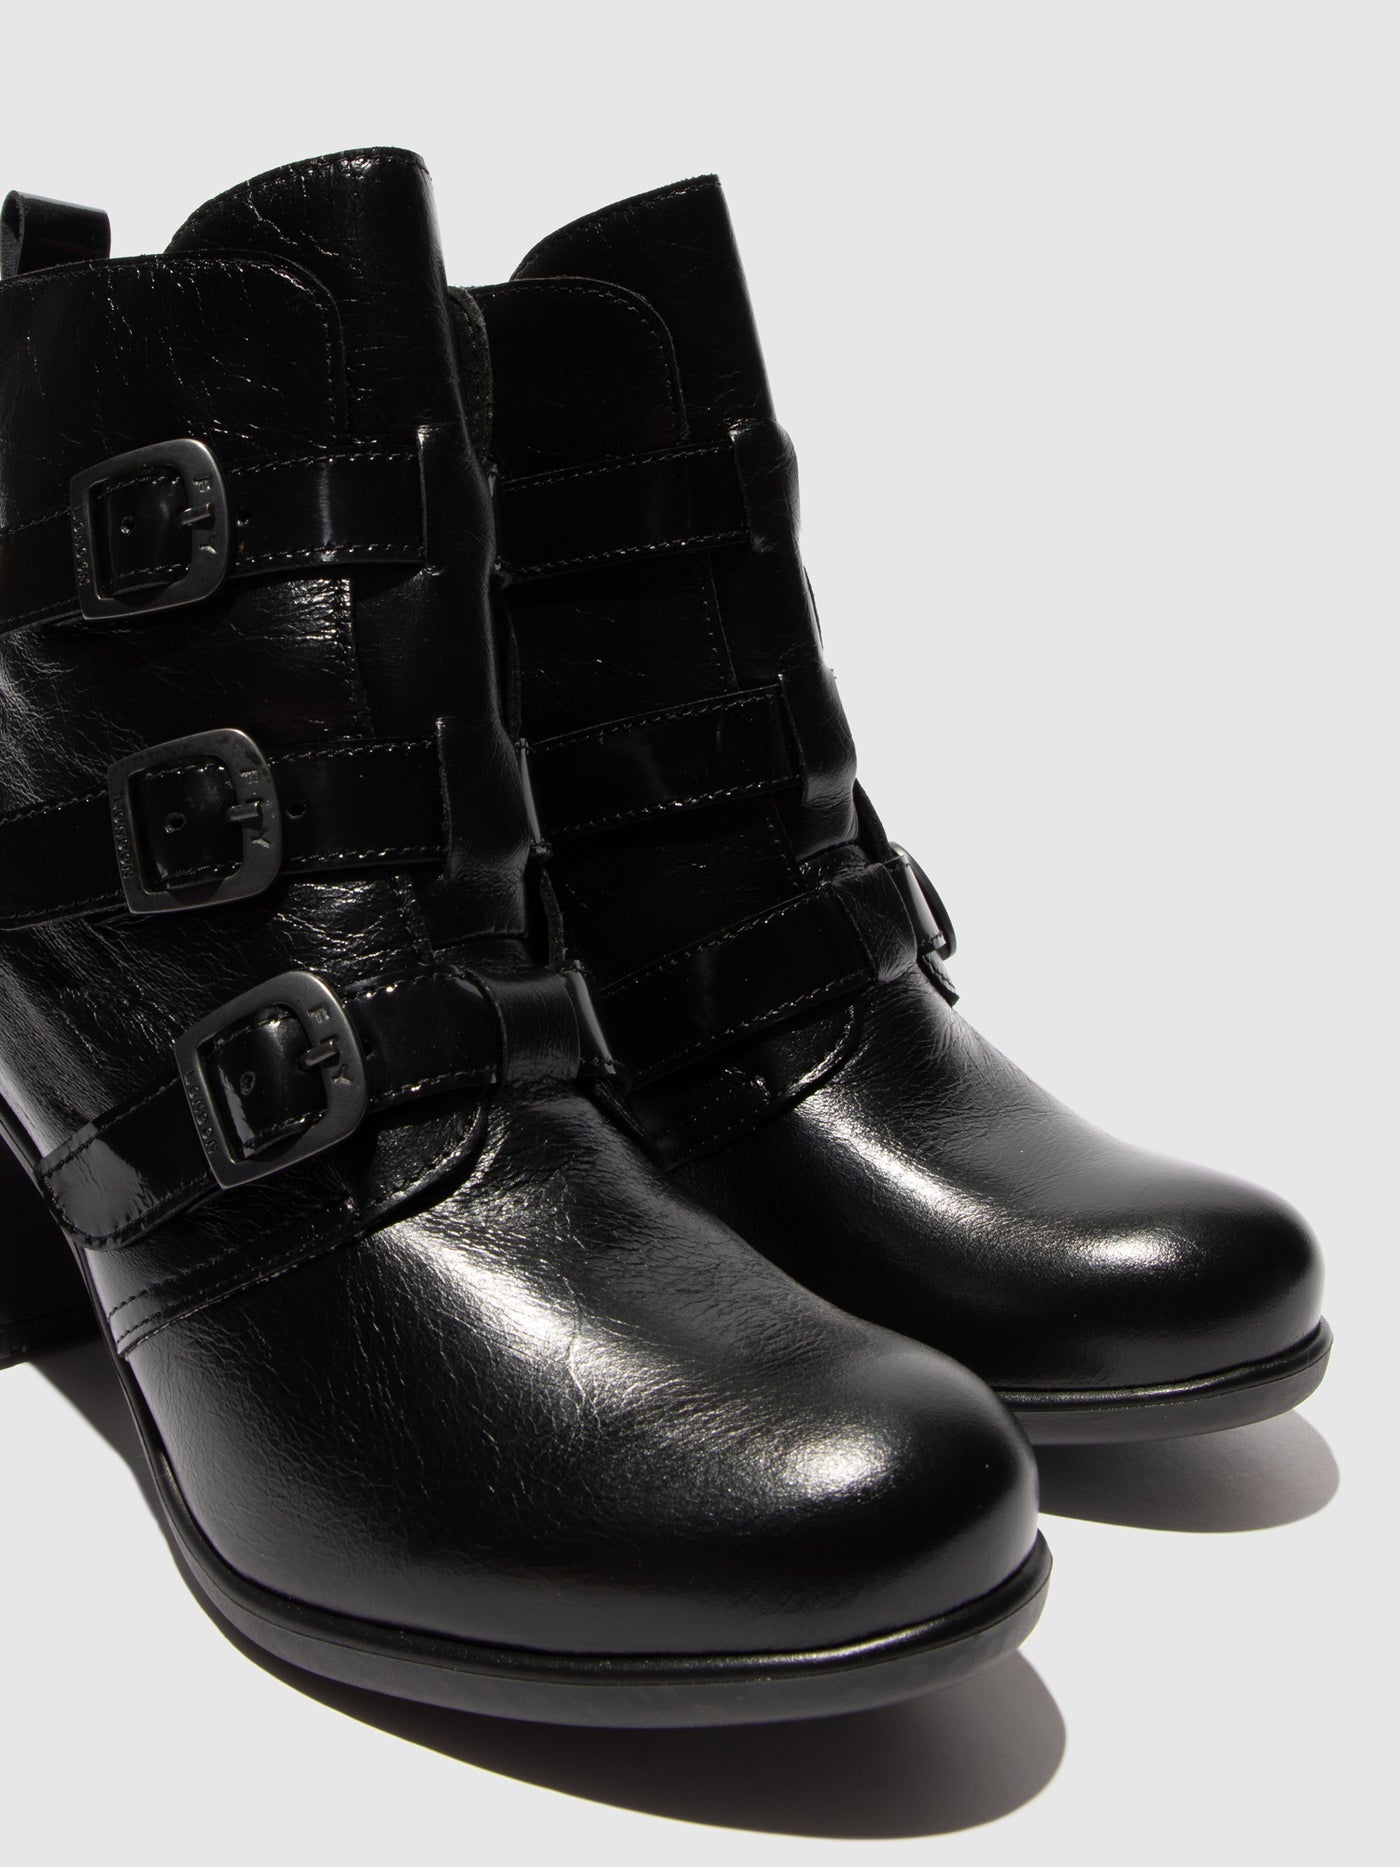 Buckle Ankle Boots KLEA012FLY BLACK